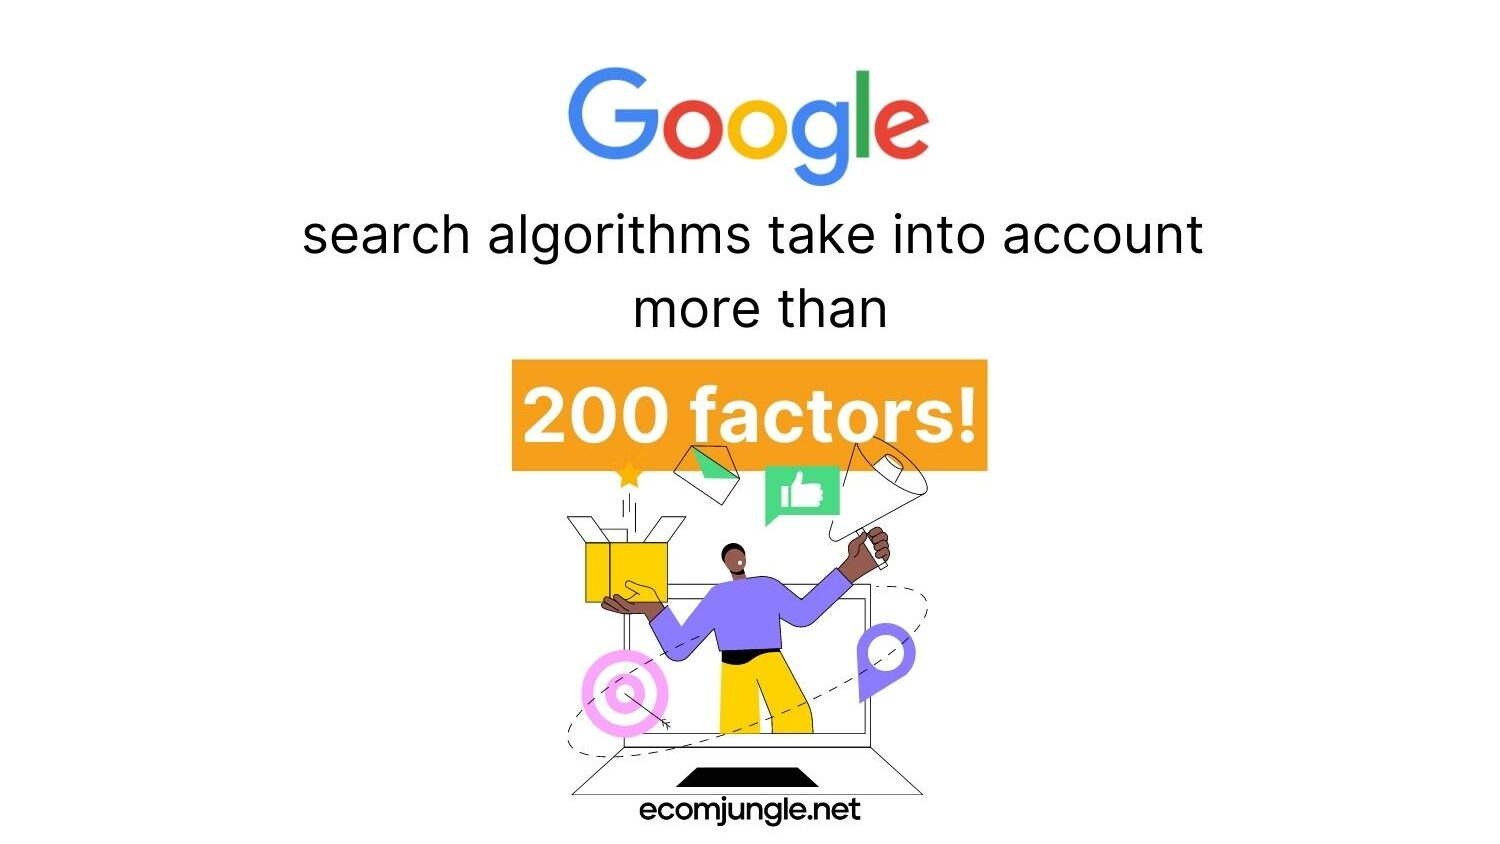 More than 200 factors are taken by google algorithms when people search